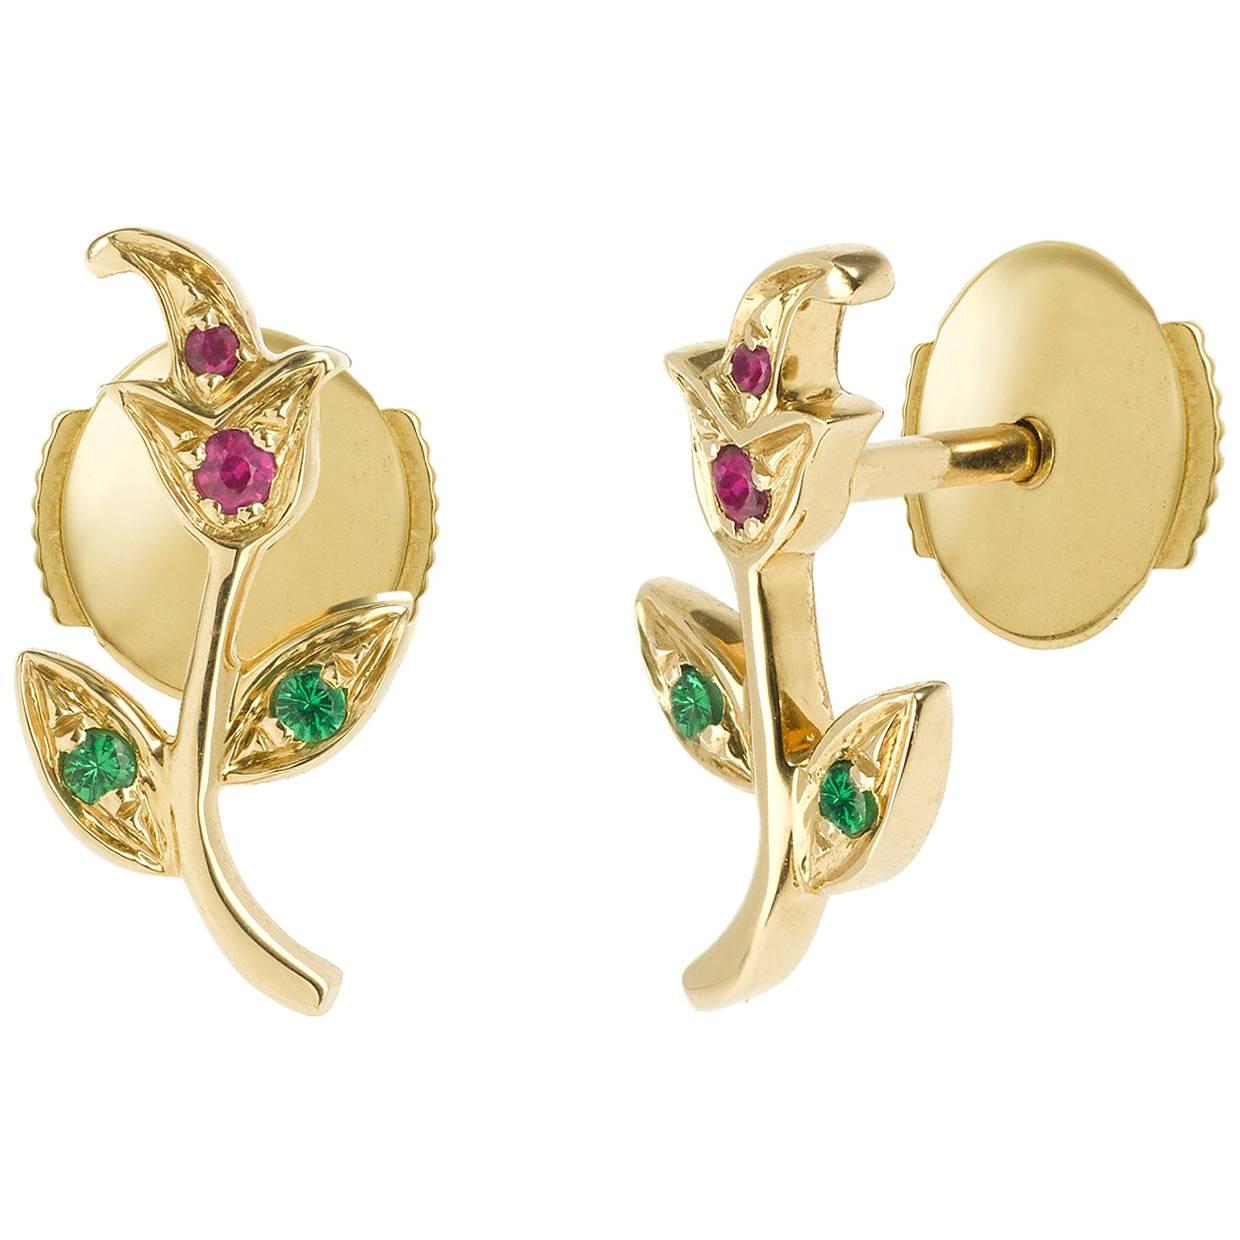 Yvonne Leon's Rose Earring in Yellow Gold 18 Carat with Ruby and Tsavorites